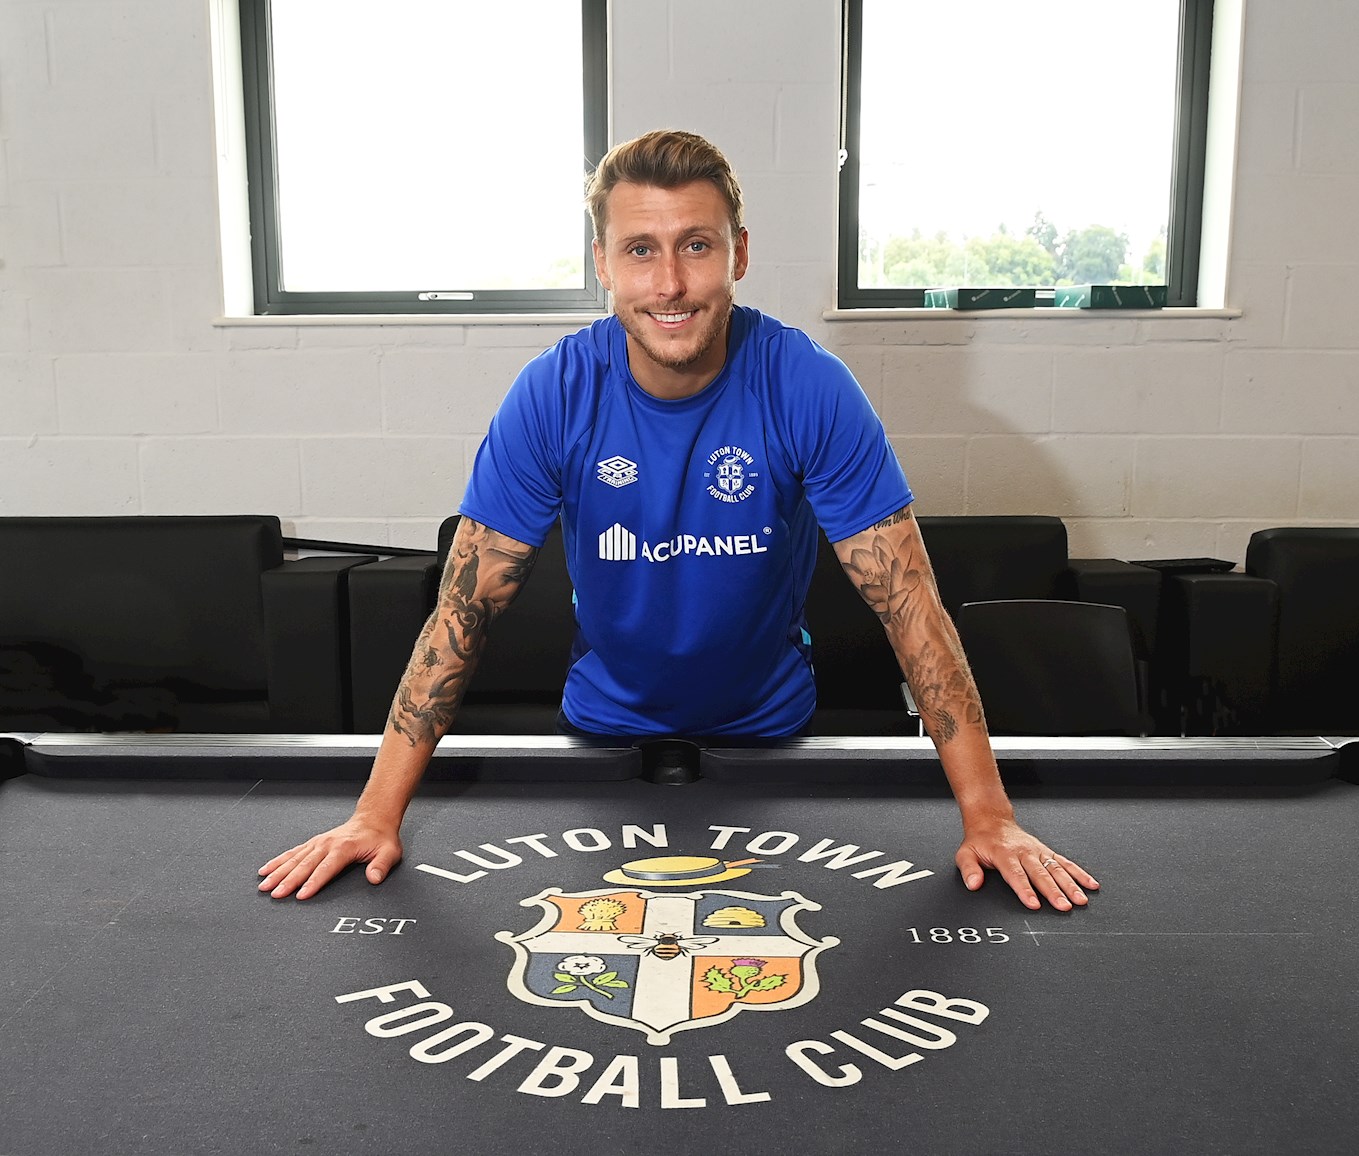 Luke Freeman poses above the Luton Town club crest on the pool table at The Brache training ground